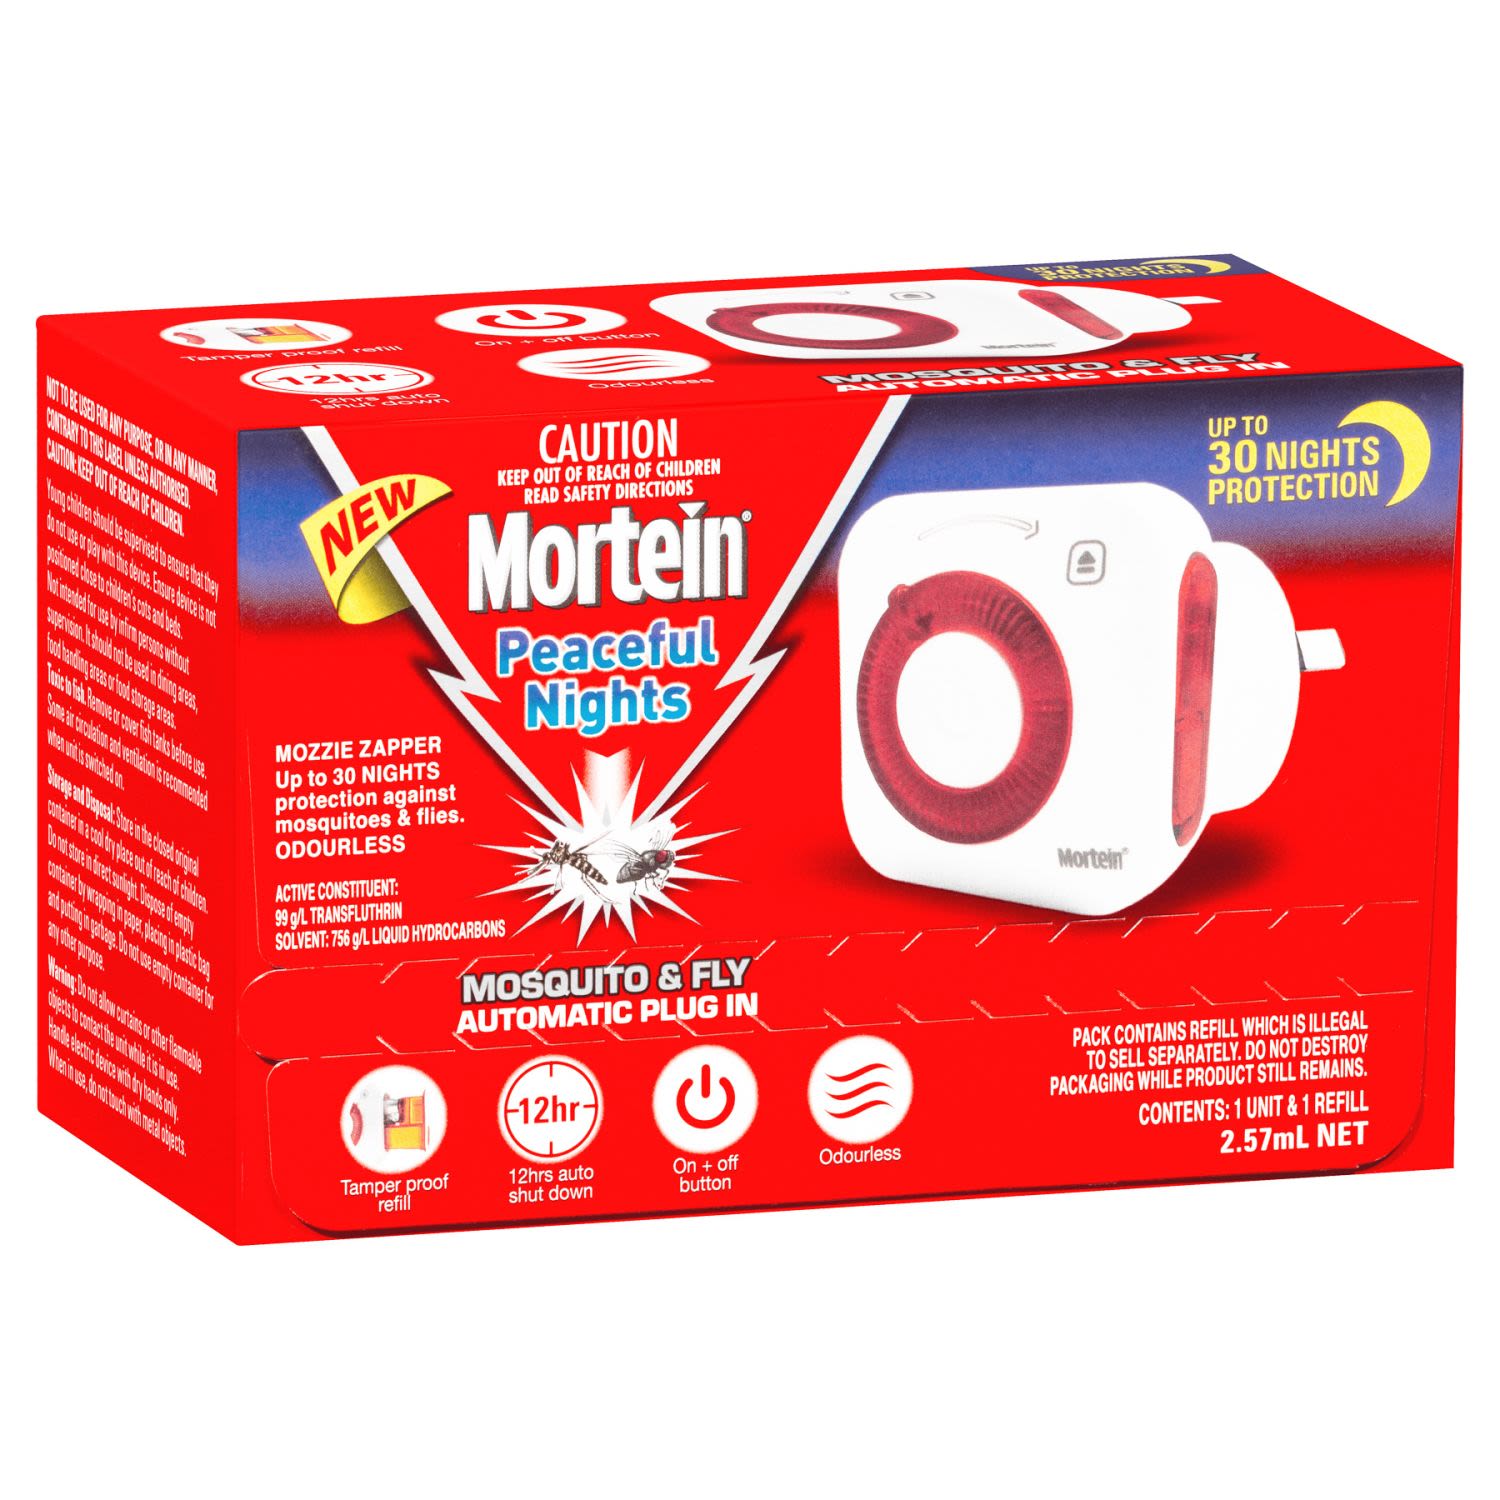 Mortein Mosquito & Fly Control Odourless, 2.75 Millilitre